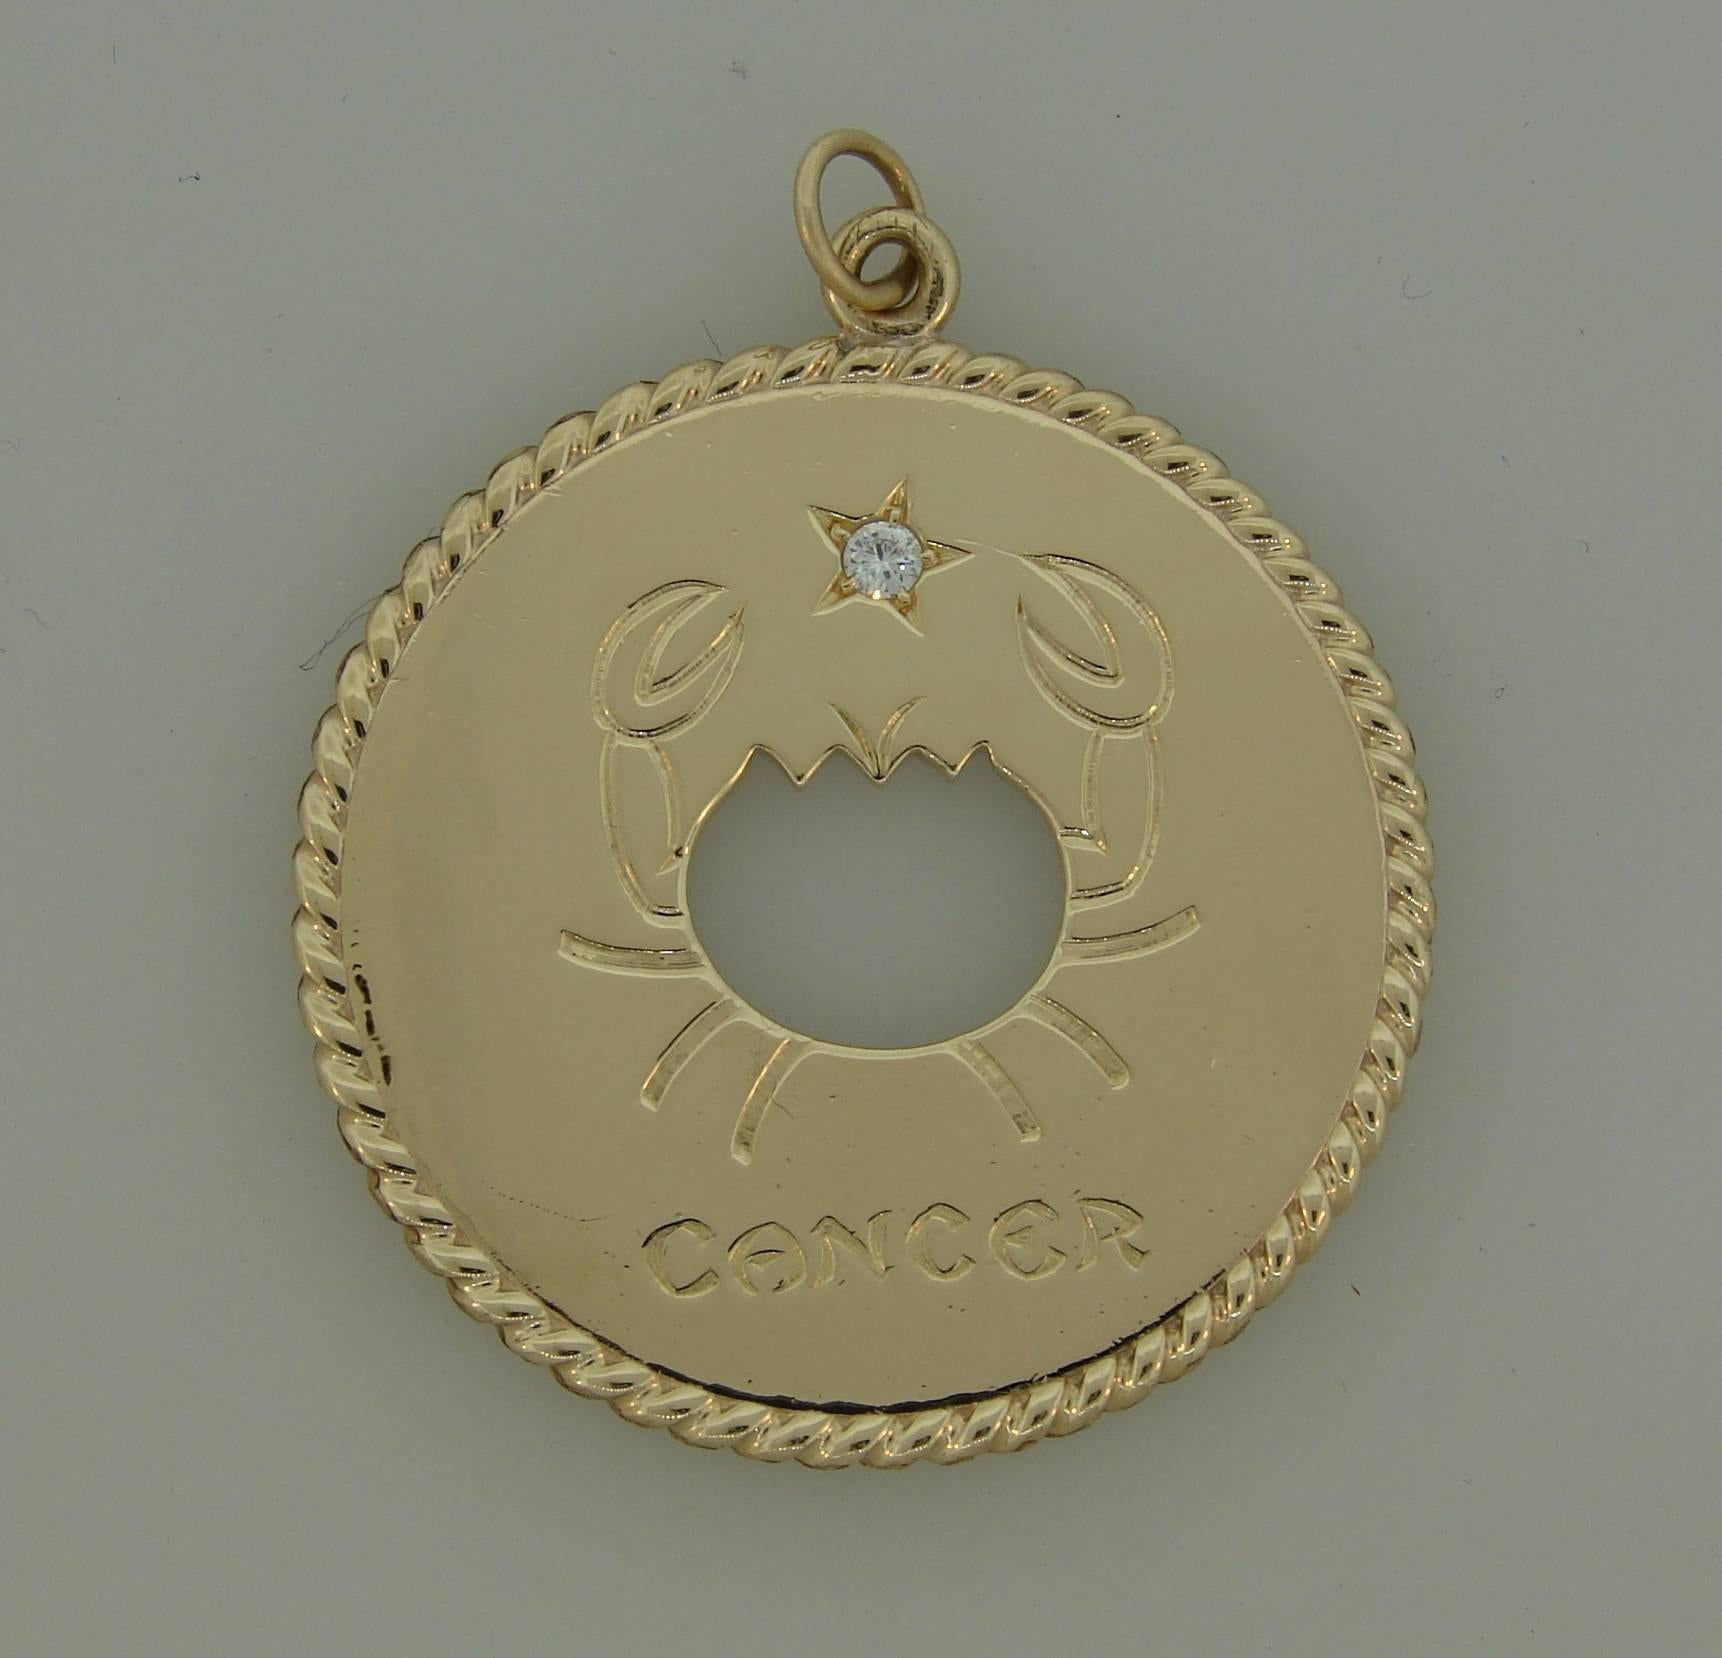 Lovely and fun Cancer Zodiac pendant created by Cartier NY in the 1970s. A perfect gift for someone who was born between June 20 and July 22. 
Made of 14 karat (stamped) yellow gold and accented with one round brilliant cut diamond. 
The pendant